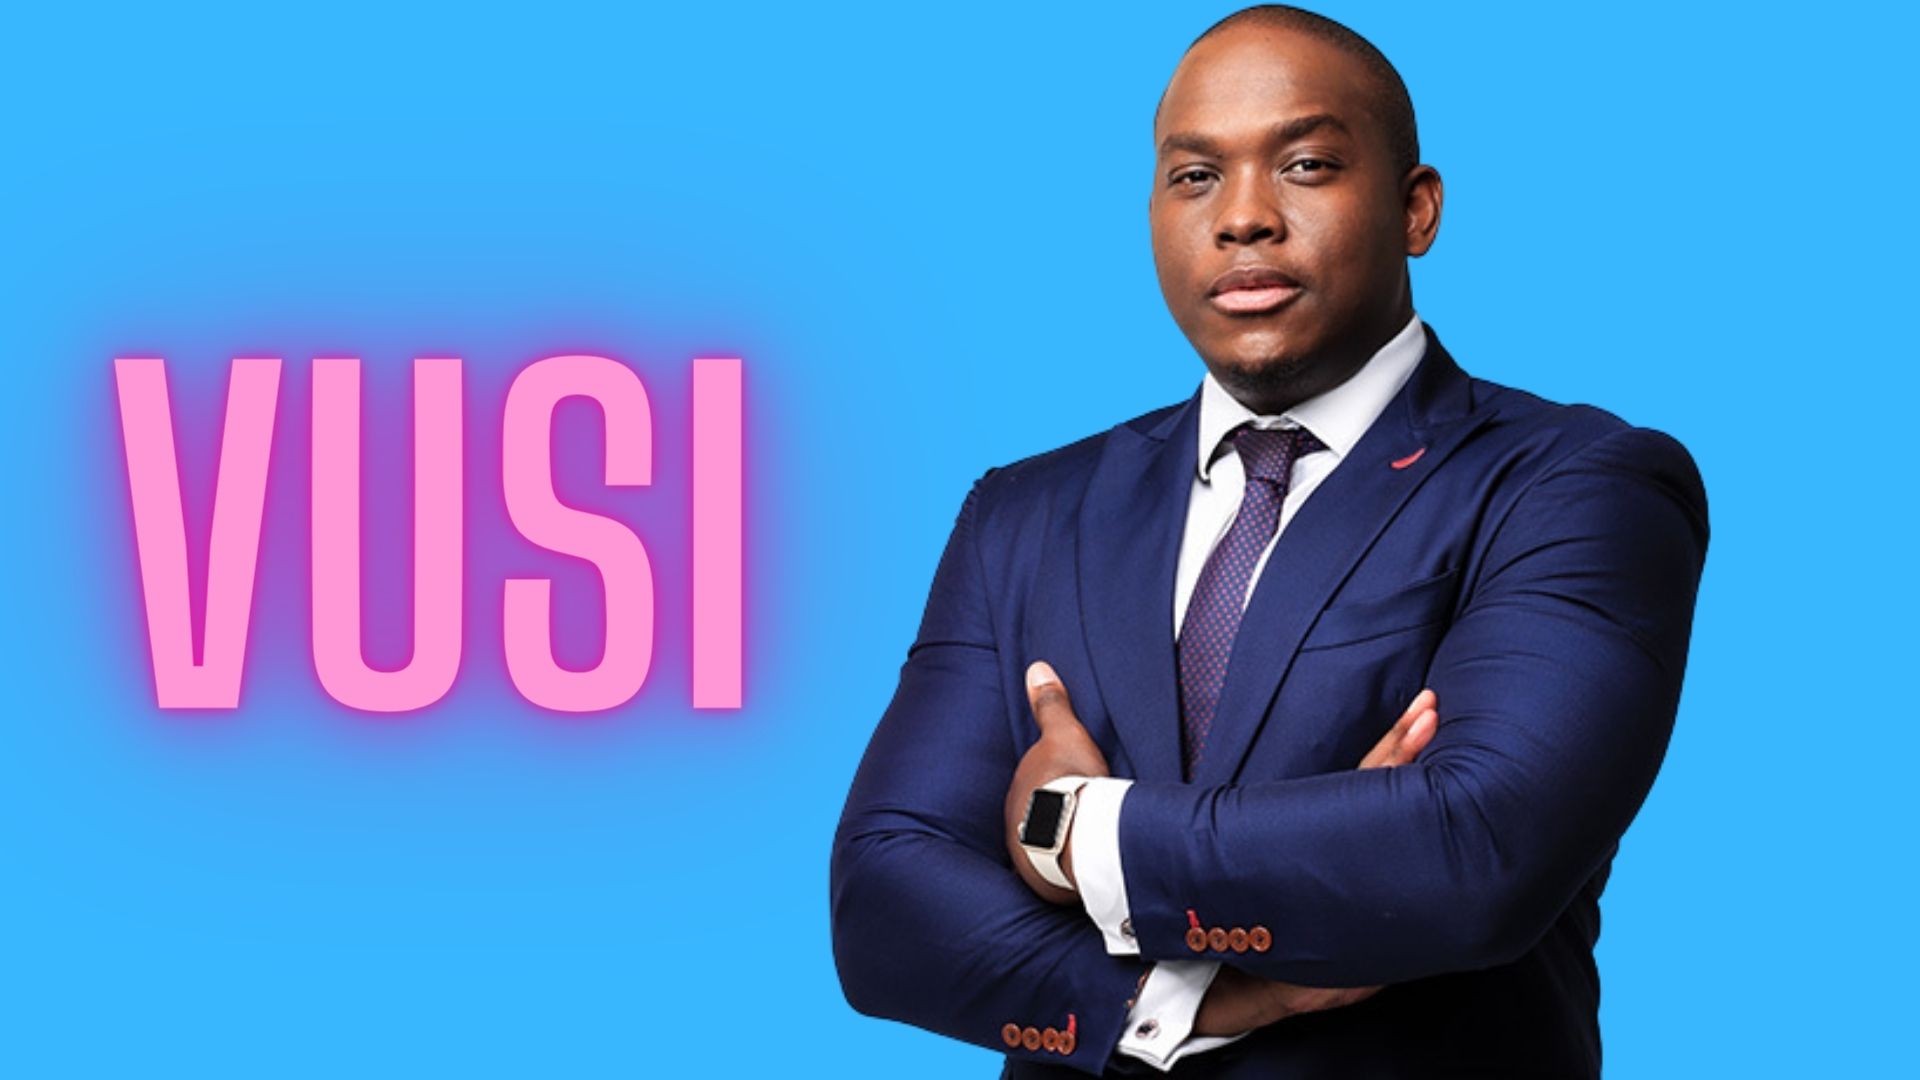 Vusi Thembekwayo Describes the 3 Types of Businesses